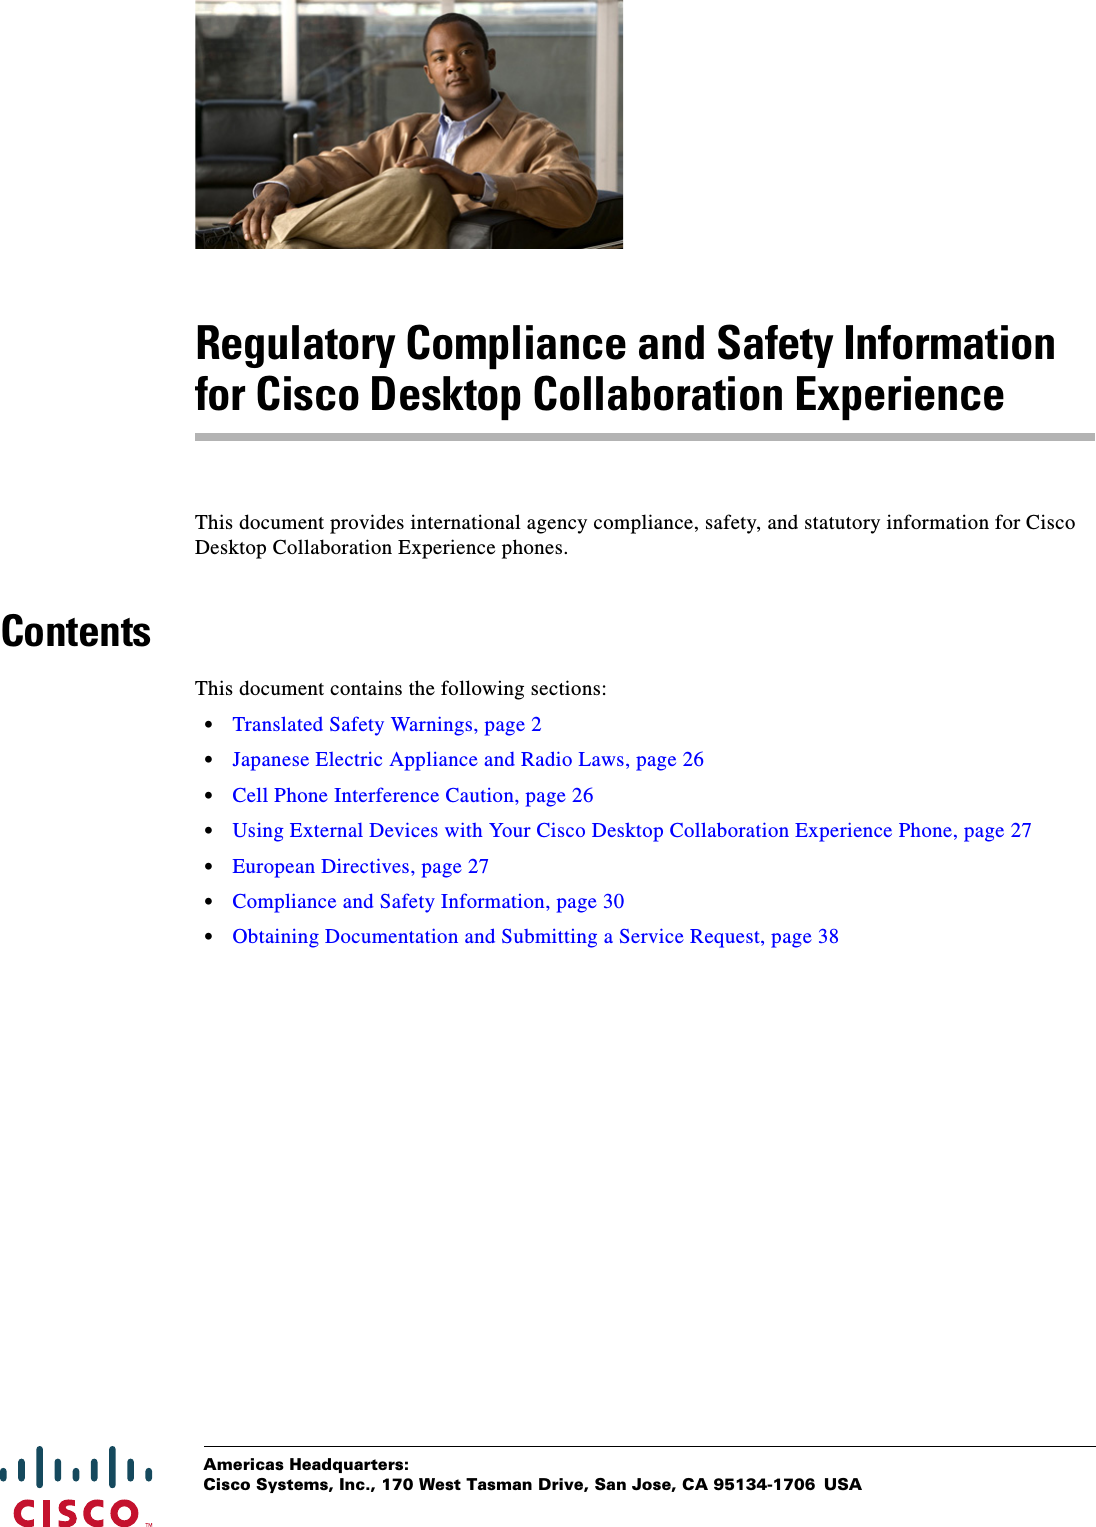  Americas Headquarters:Cisco Systems, Inc., 170 West Tasman Drive, San Jose, CA 95134-1706 USARegulatory Compliance and Safety Information for Cisco Desktop Collaboration ExperienceThis document provides international agency compliance, safety, and statutory information for Cisco Desktop Collaboration Experience phones.ContentsThis document contains the following sections:•Translated Safety Warnings, page 2•Japanese Electric Appliance and Radio Laws, page 26•Cell Phone Interference Caution, page 26•Using External Devices with Your Cisco Desktop Collaboration Experience Phone, page 27•European Directives, page 27•Compliance and Safety Information, page 30•Obtaining Documentation and Submitting a Service Request, page 38